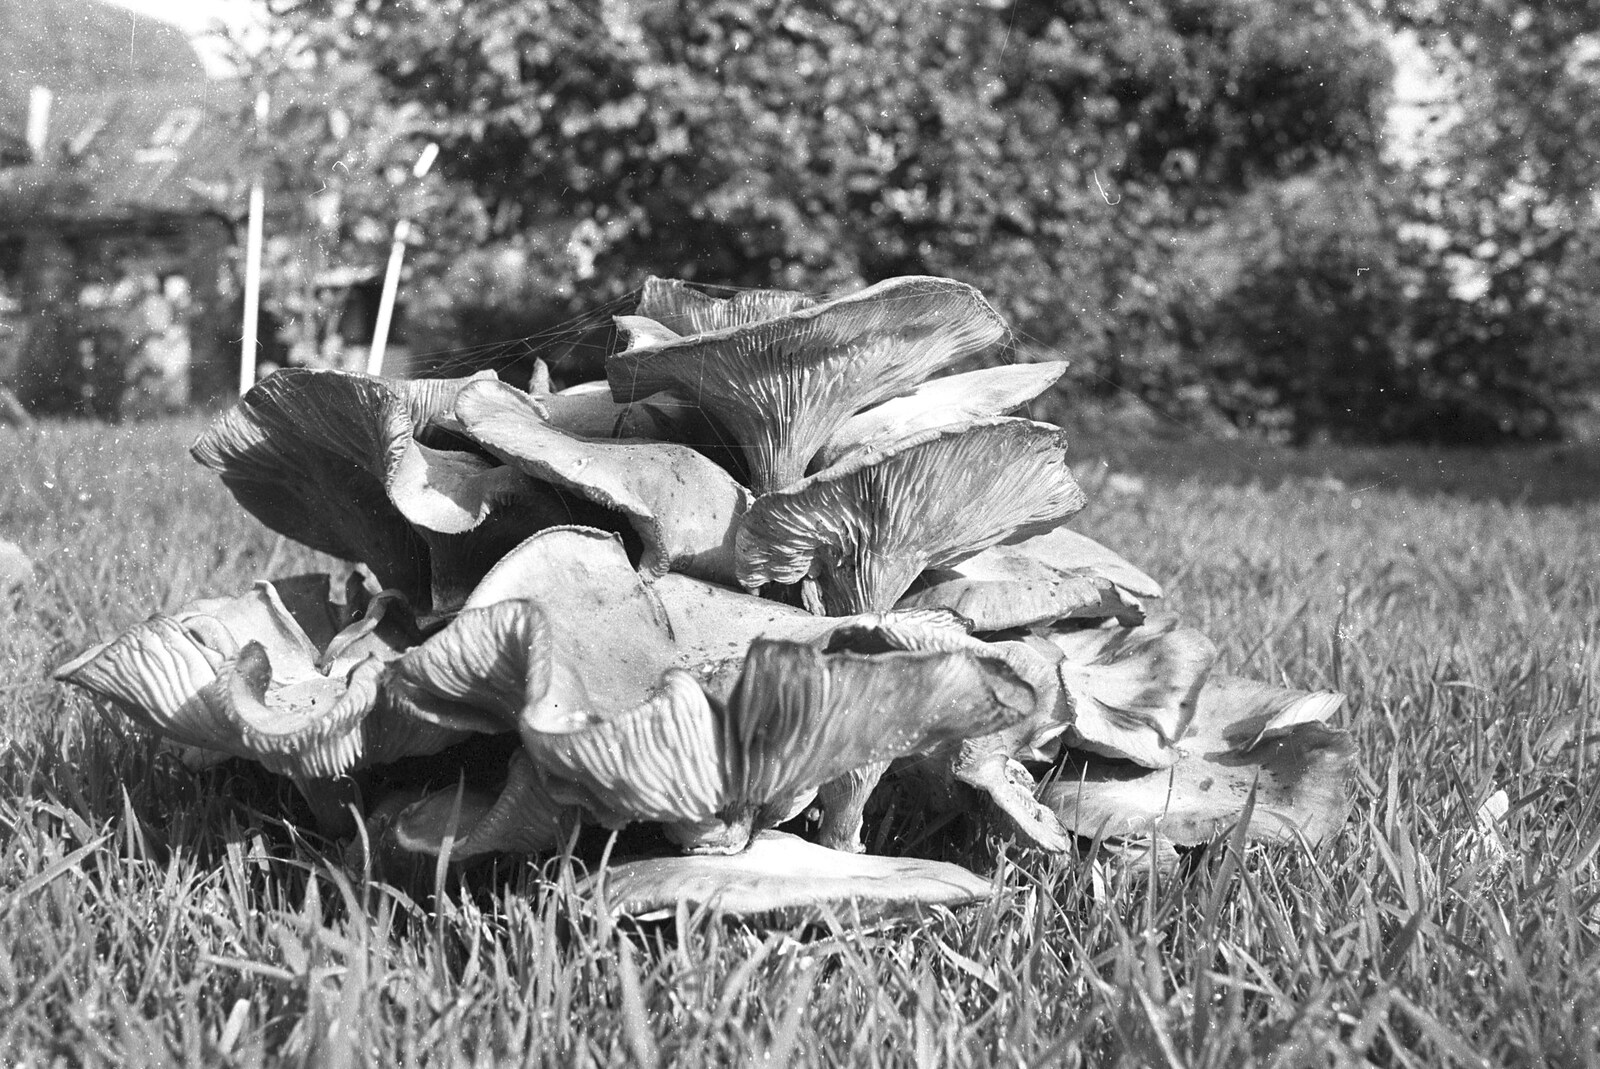 London Party and a Trip to Mother's, Hoo Meavy, Devon - 5th August 1993: Fungus in the garden